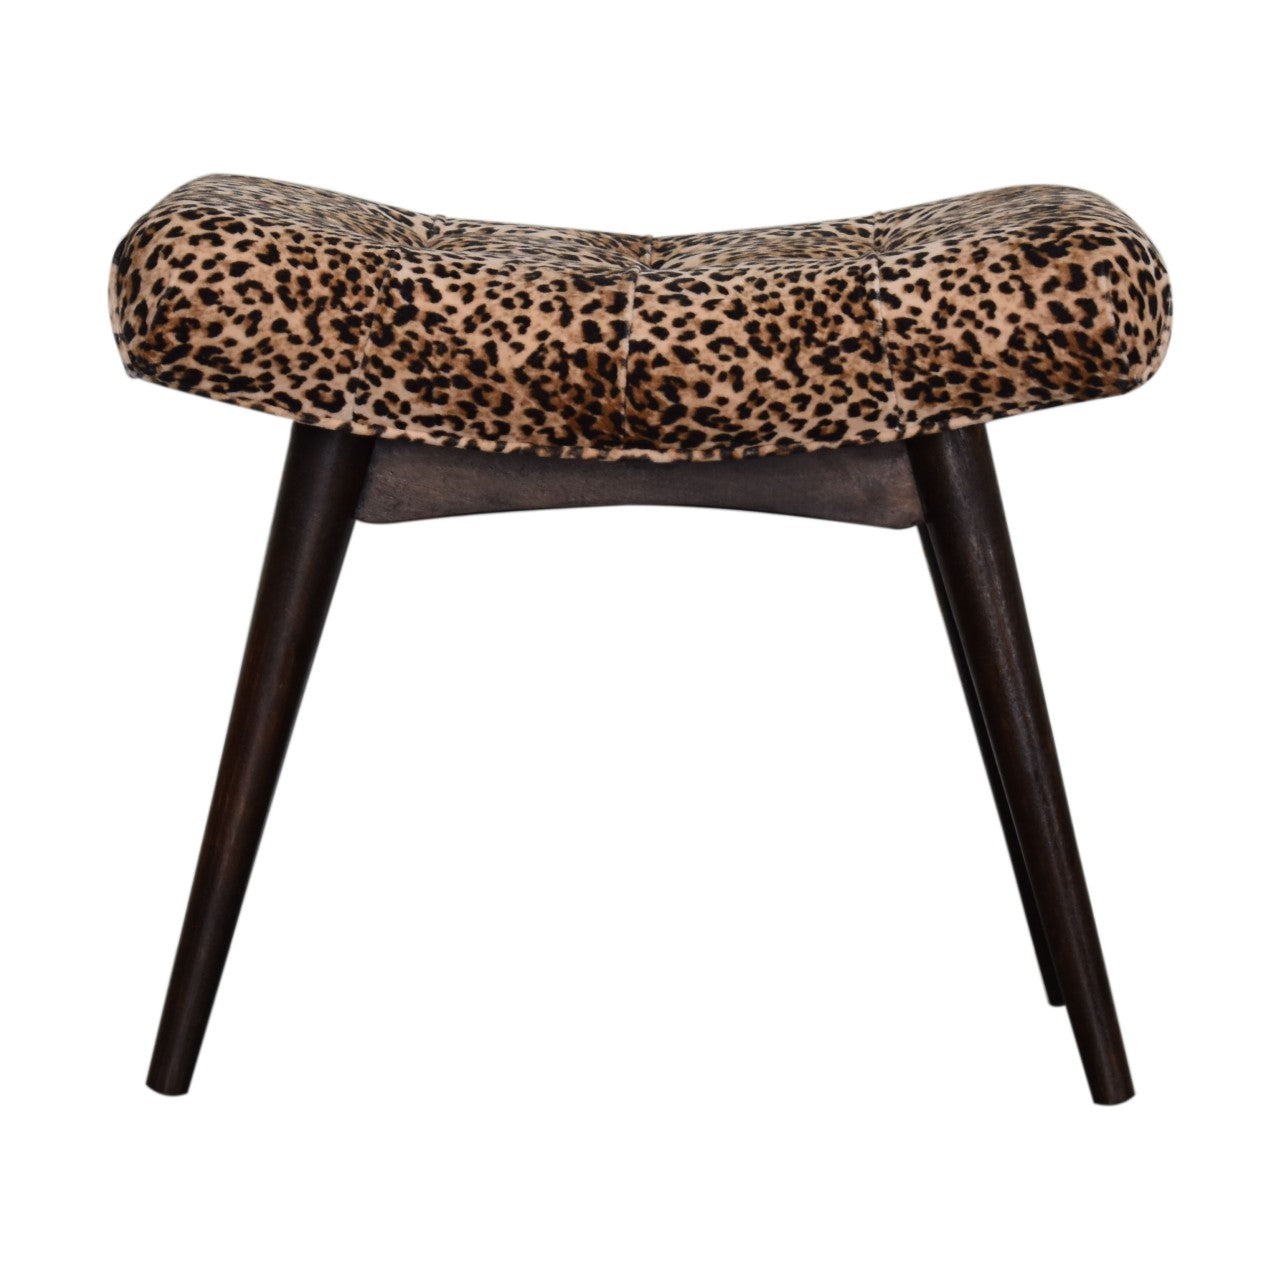 Leopard Print Curved Bench - mancavesuperstore